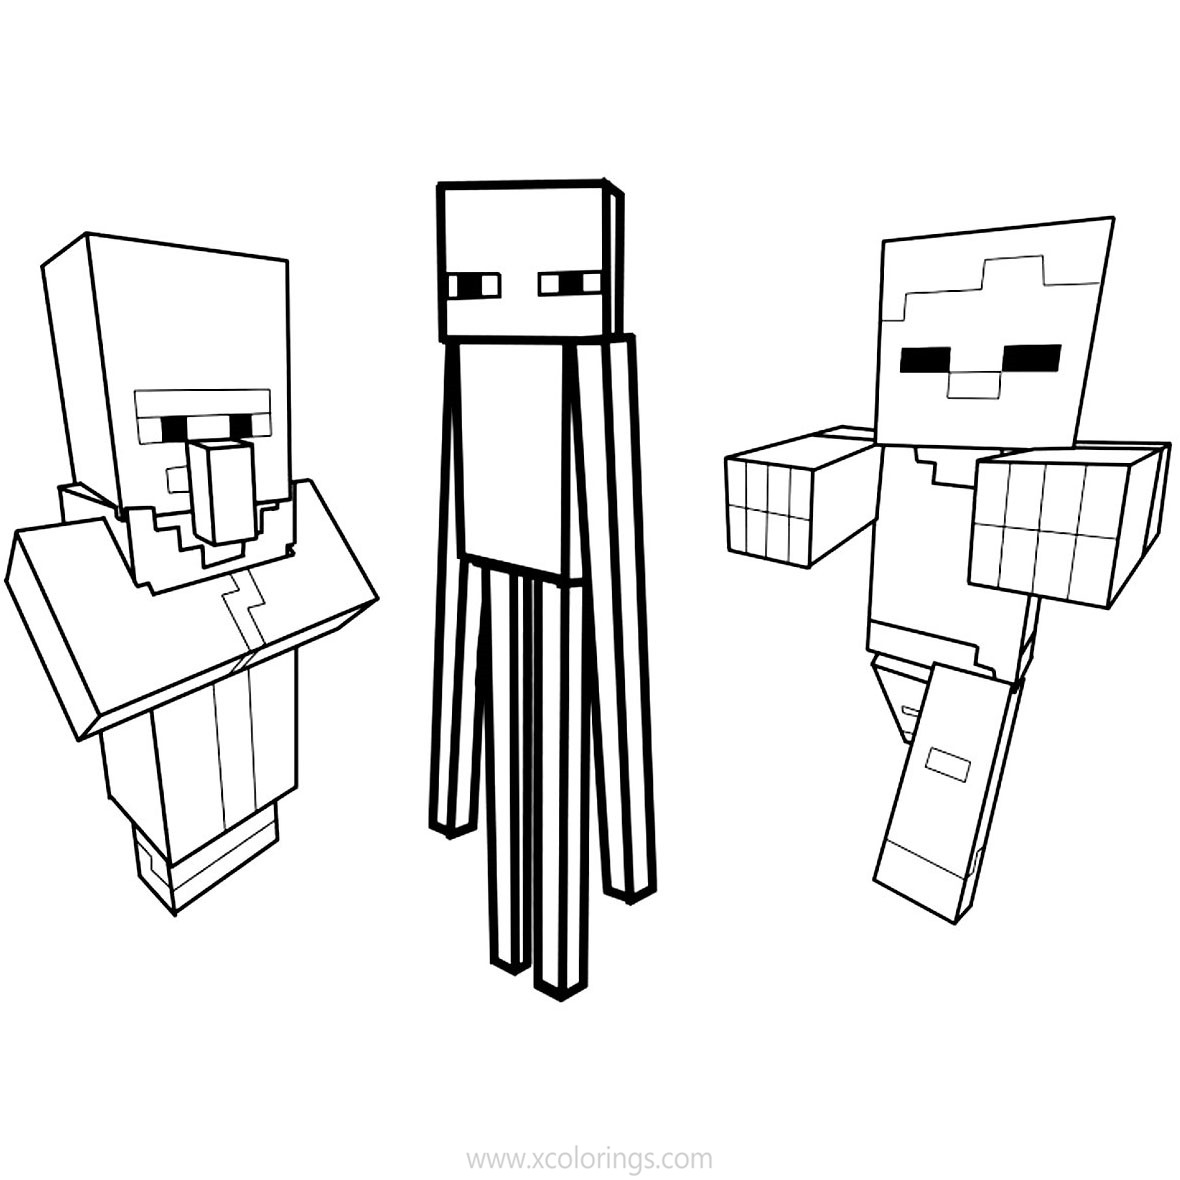 Free Minecraft Pillager Coloring Pages with Steve printable